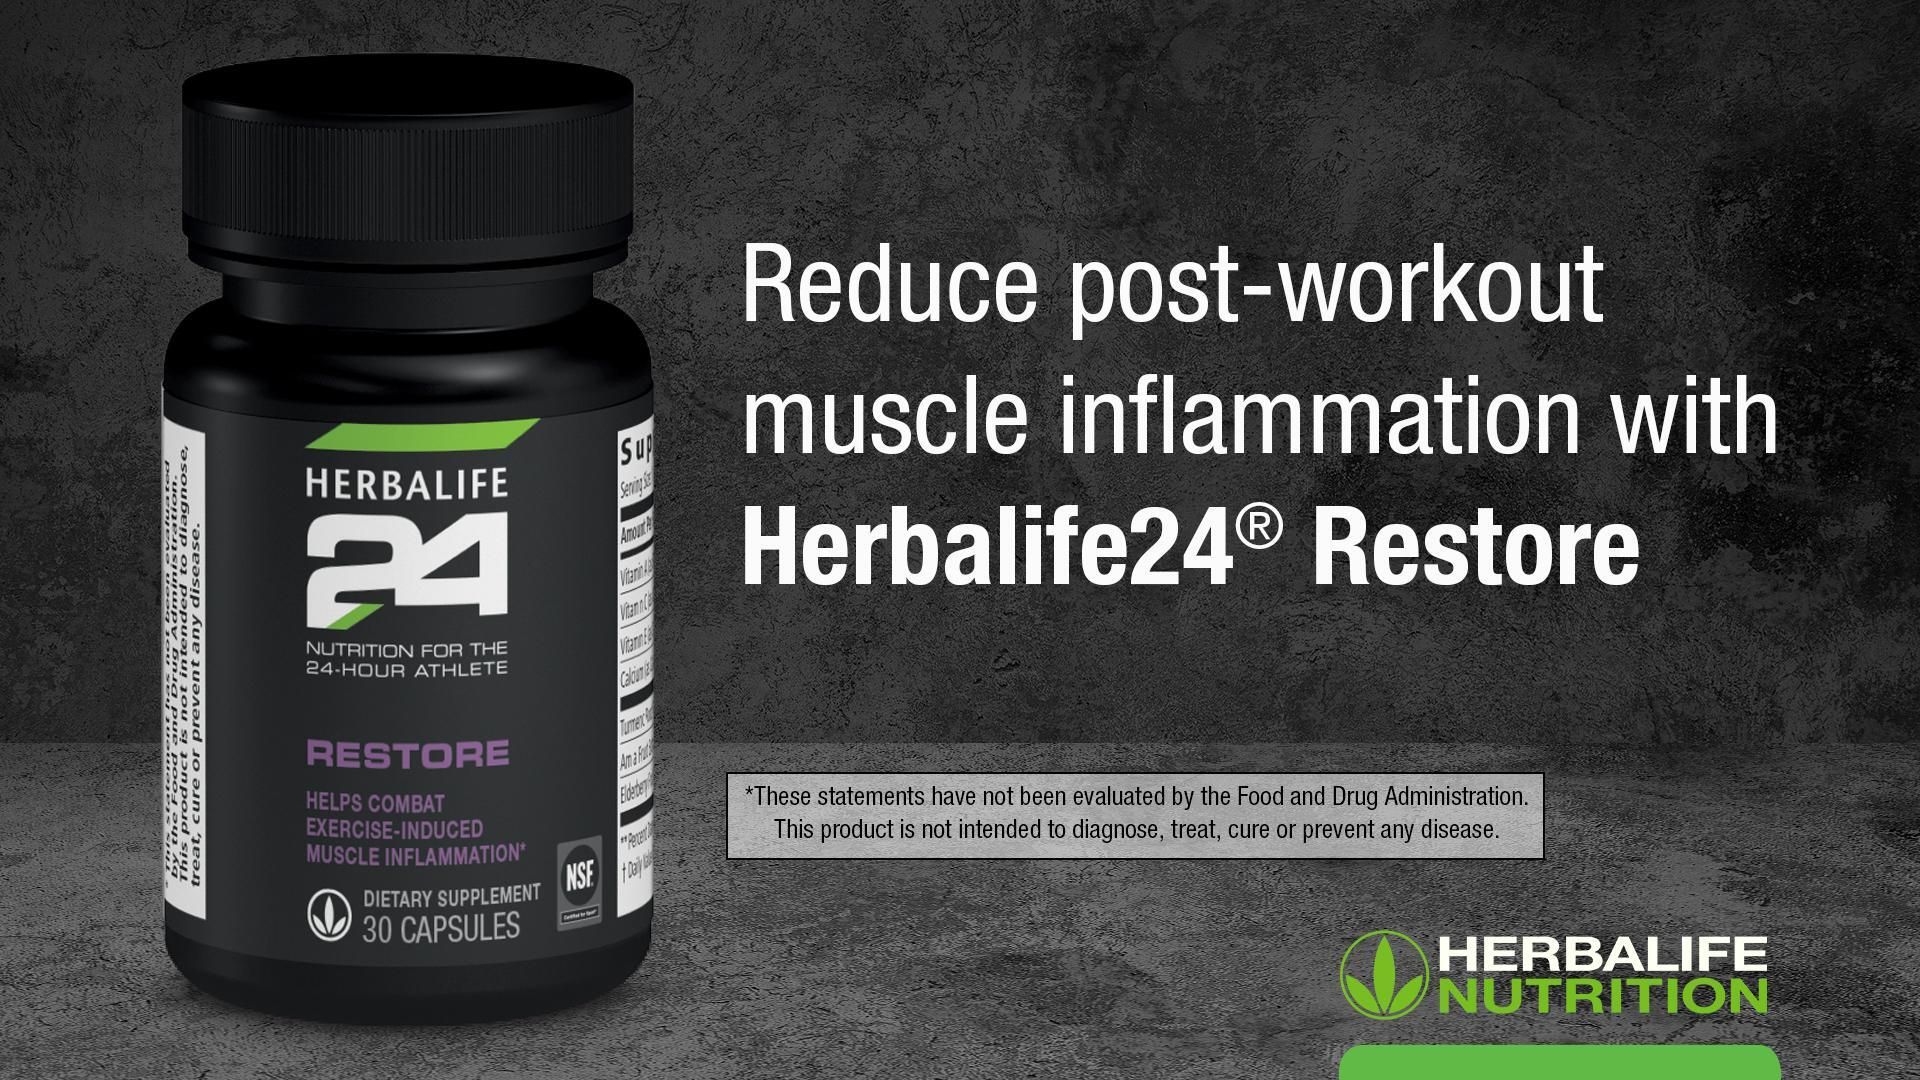 Herbalife24® Restore: Know the Products